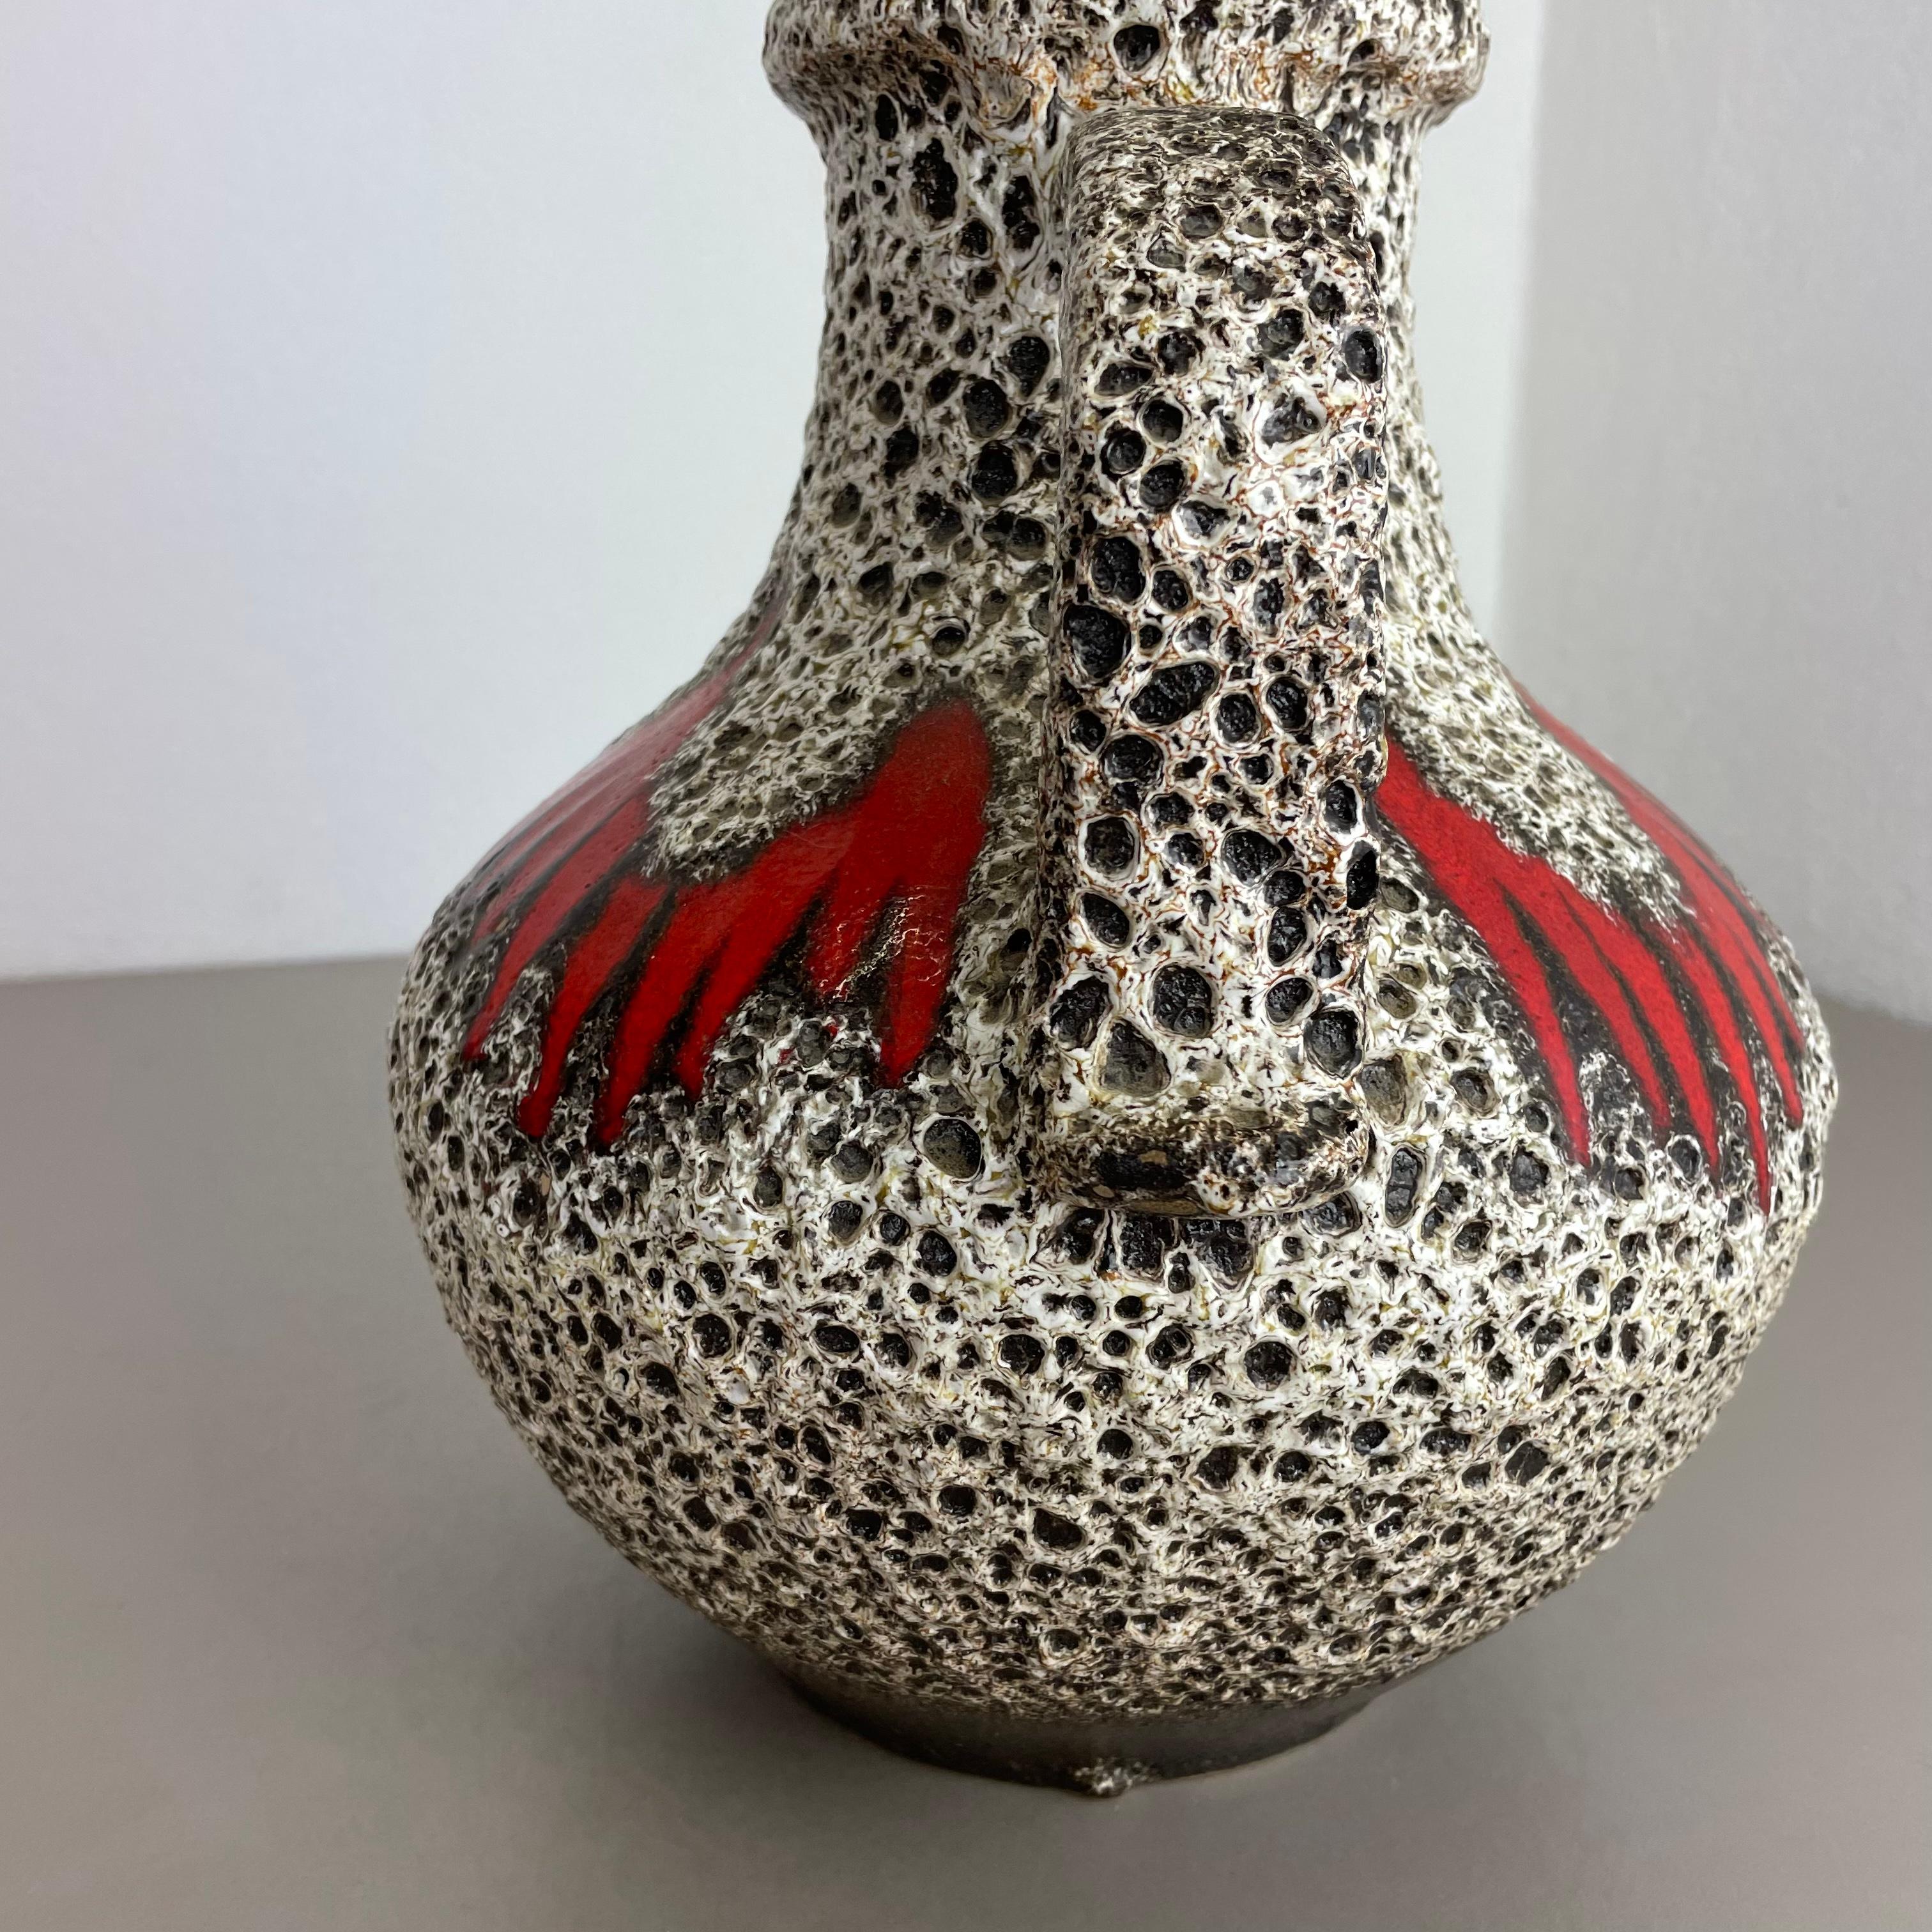 Extraordinary Zig Zag Pottery Fat Lava Vase Made by Scheurich, Germany, 1970s For Sale 3